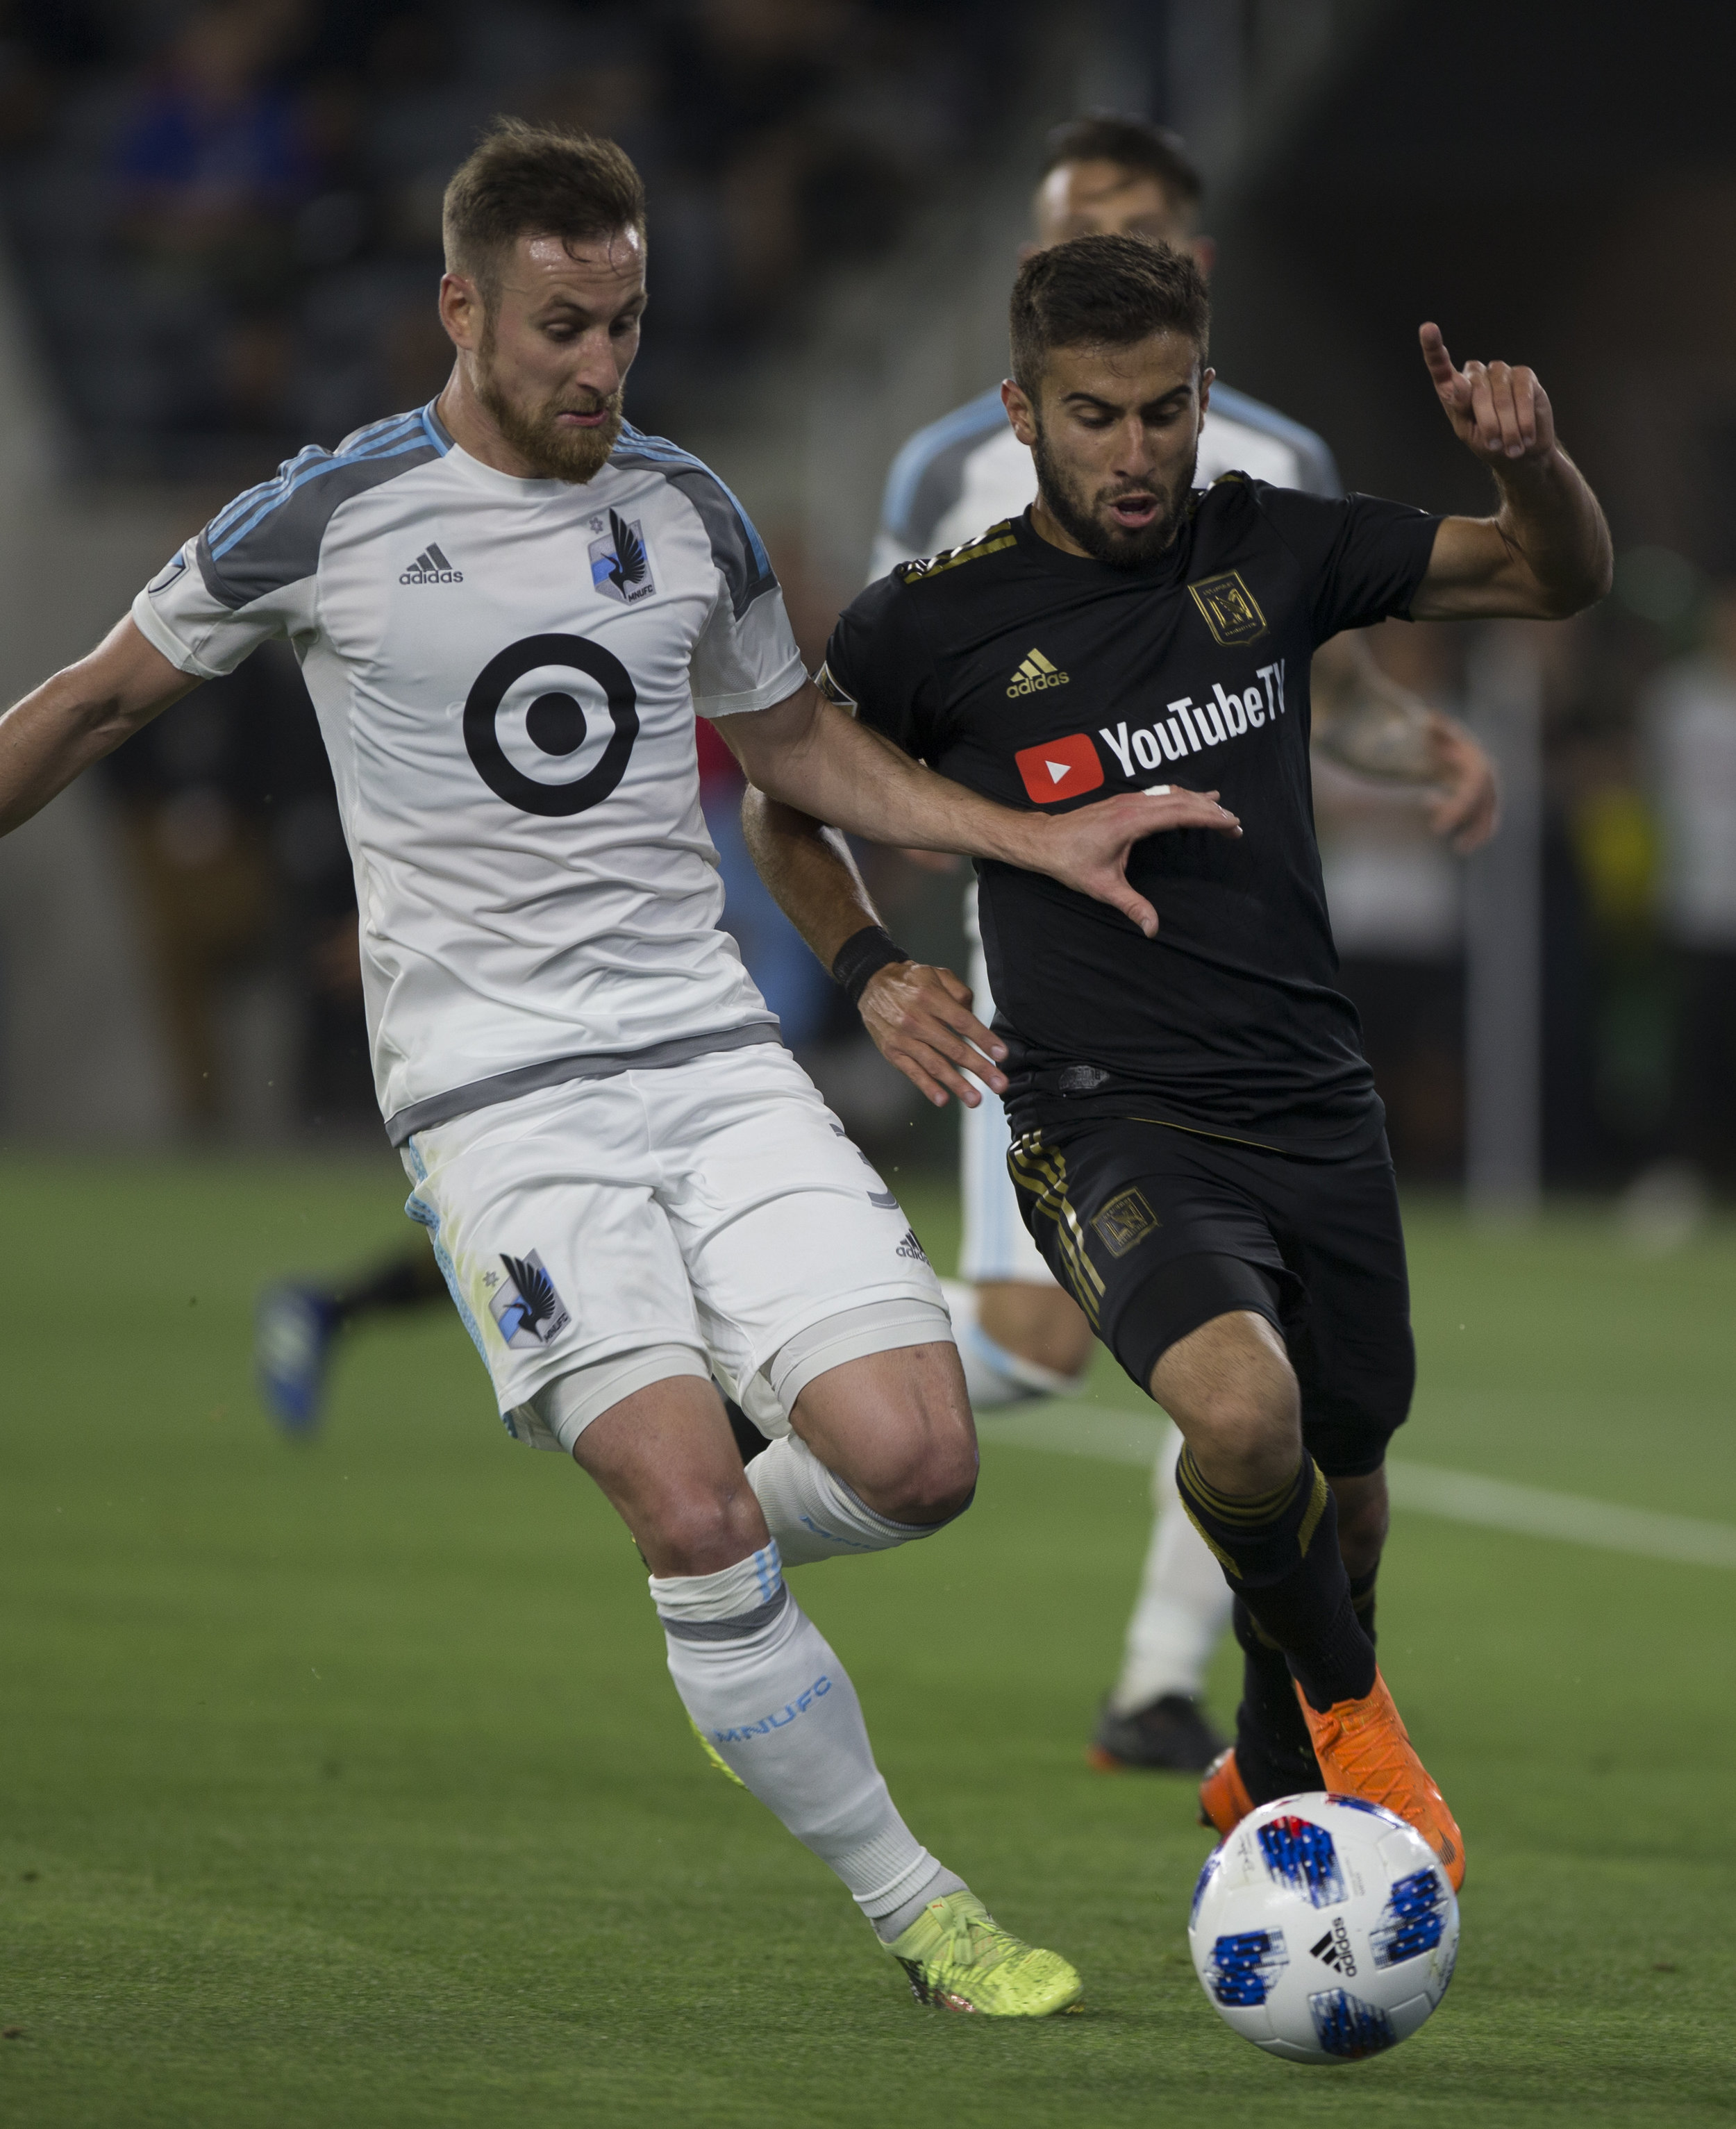  Minnesota United Football Club defender Jerome Thiesson (3, left) battles for the ball against Los Angeles Football Club forward Diego Rossi (9, right) during their match at Banc of California Stadium on May 9, 2018 where the LAFC won 2-0. (Zane Mey